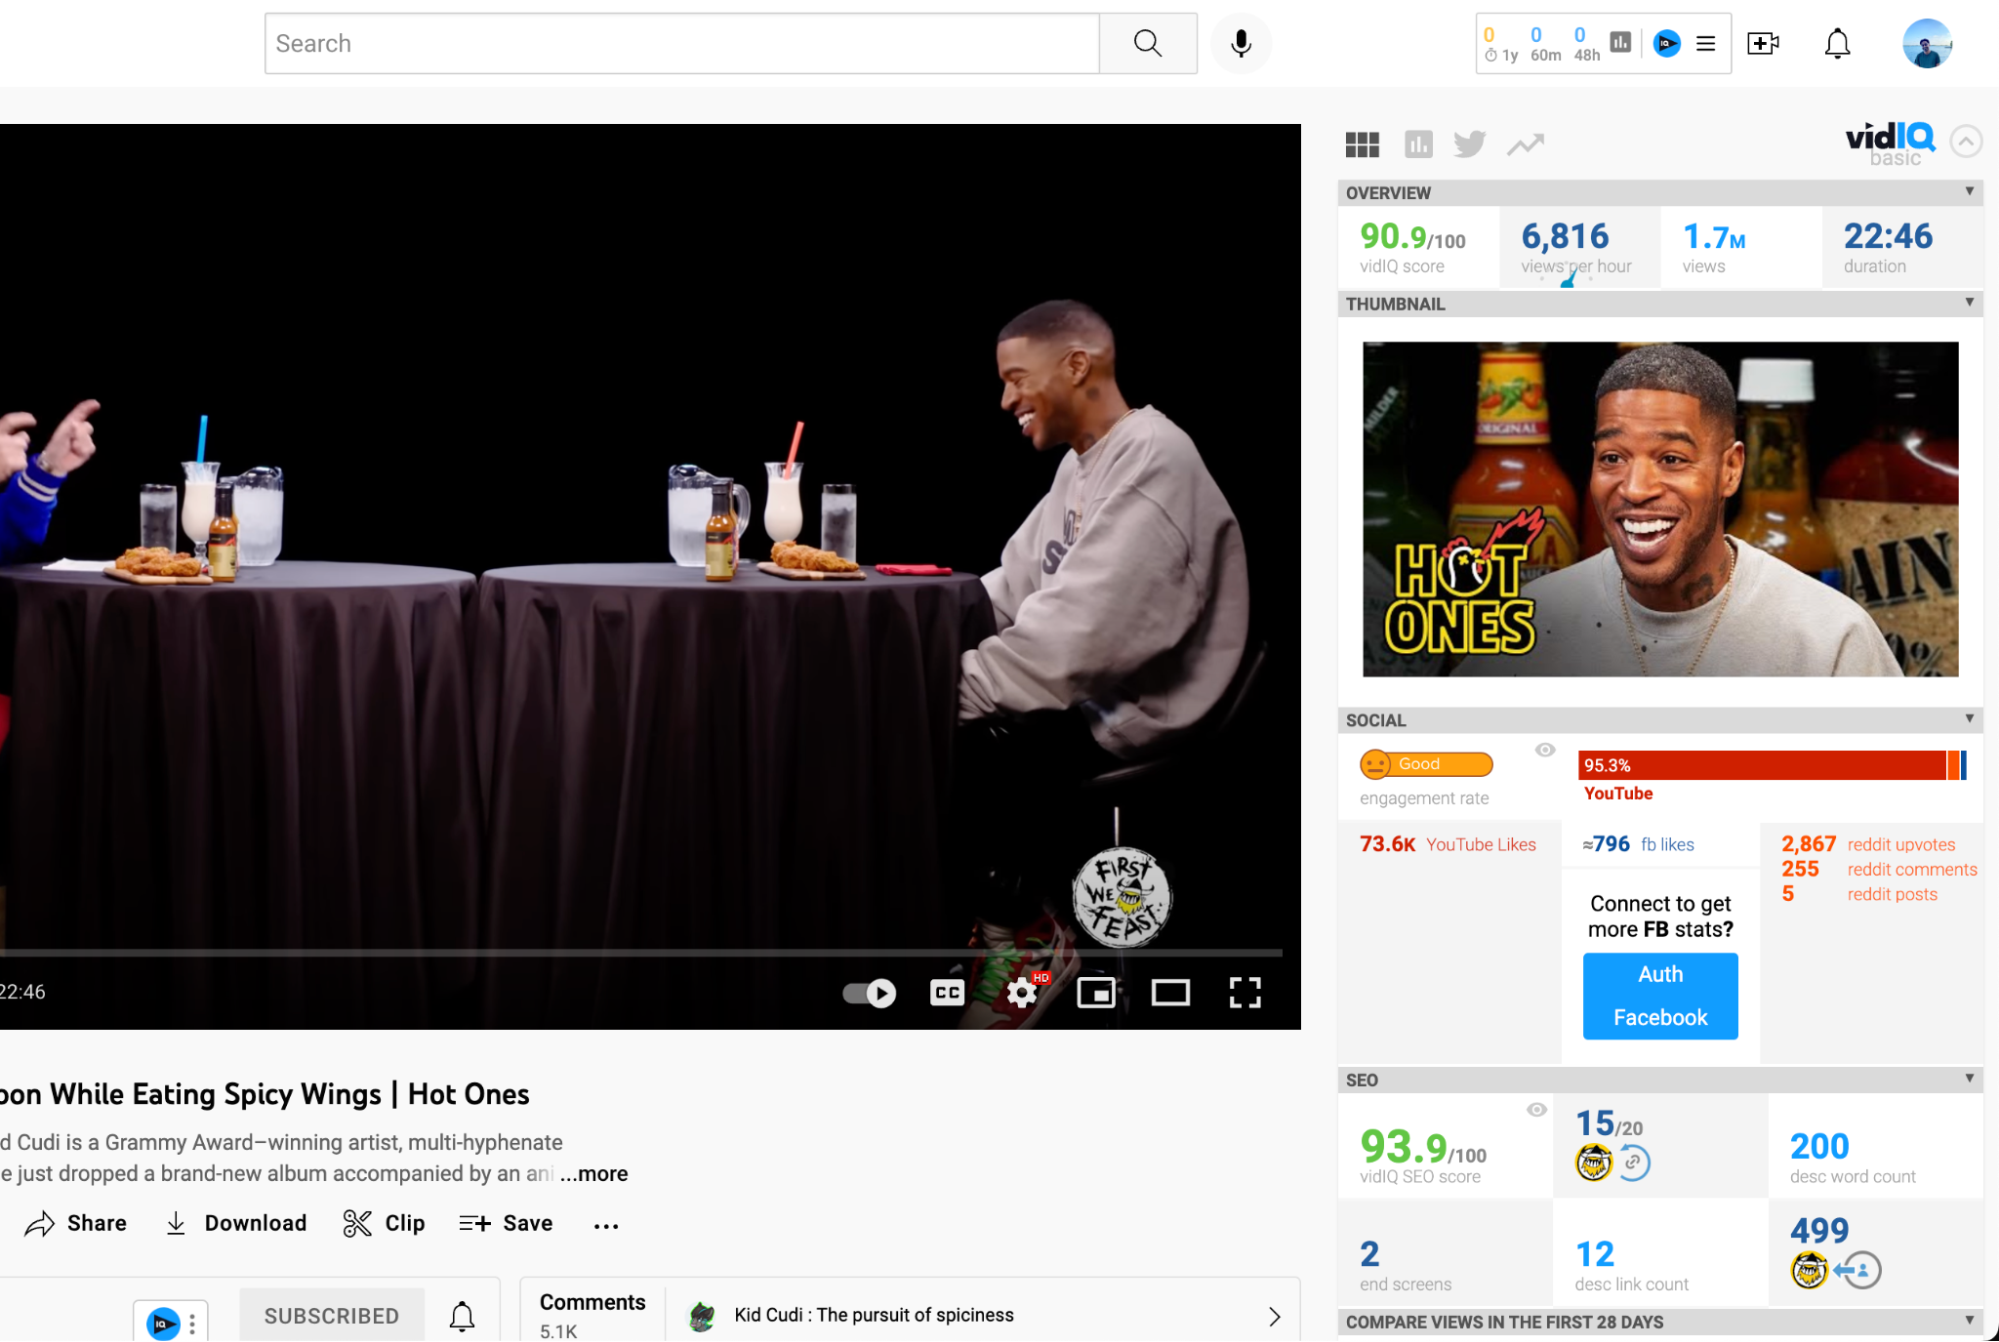 Kid Cudi laughs while eating spicy wings during a "Hot Ones" interview on YouTube.